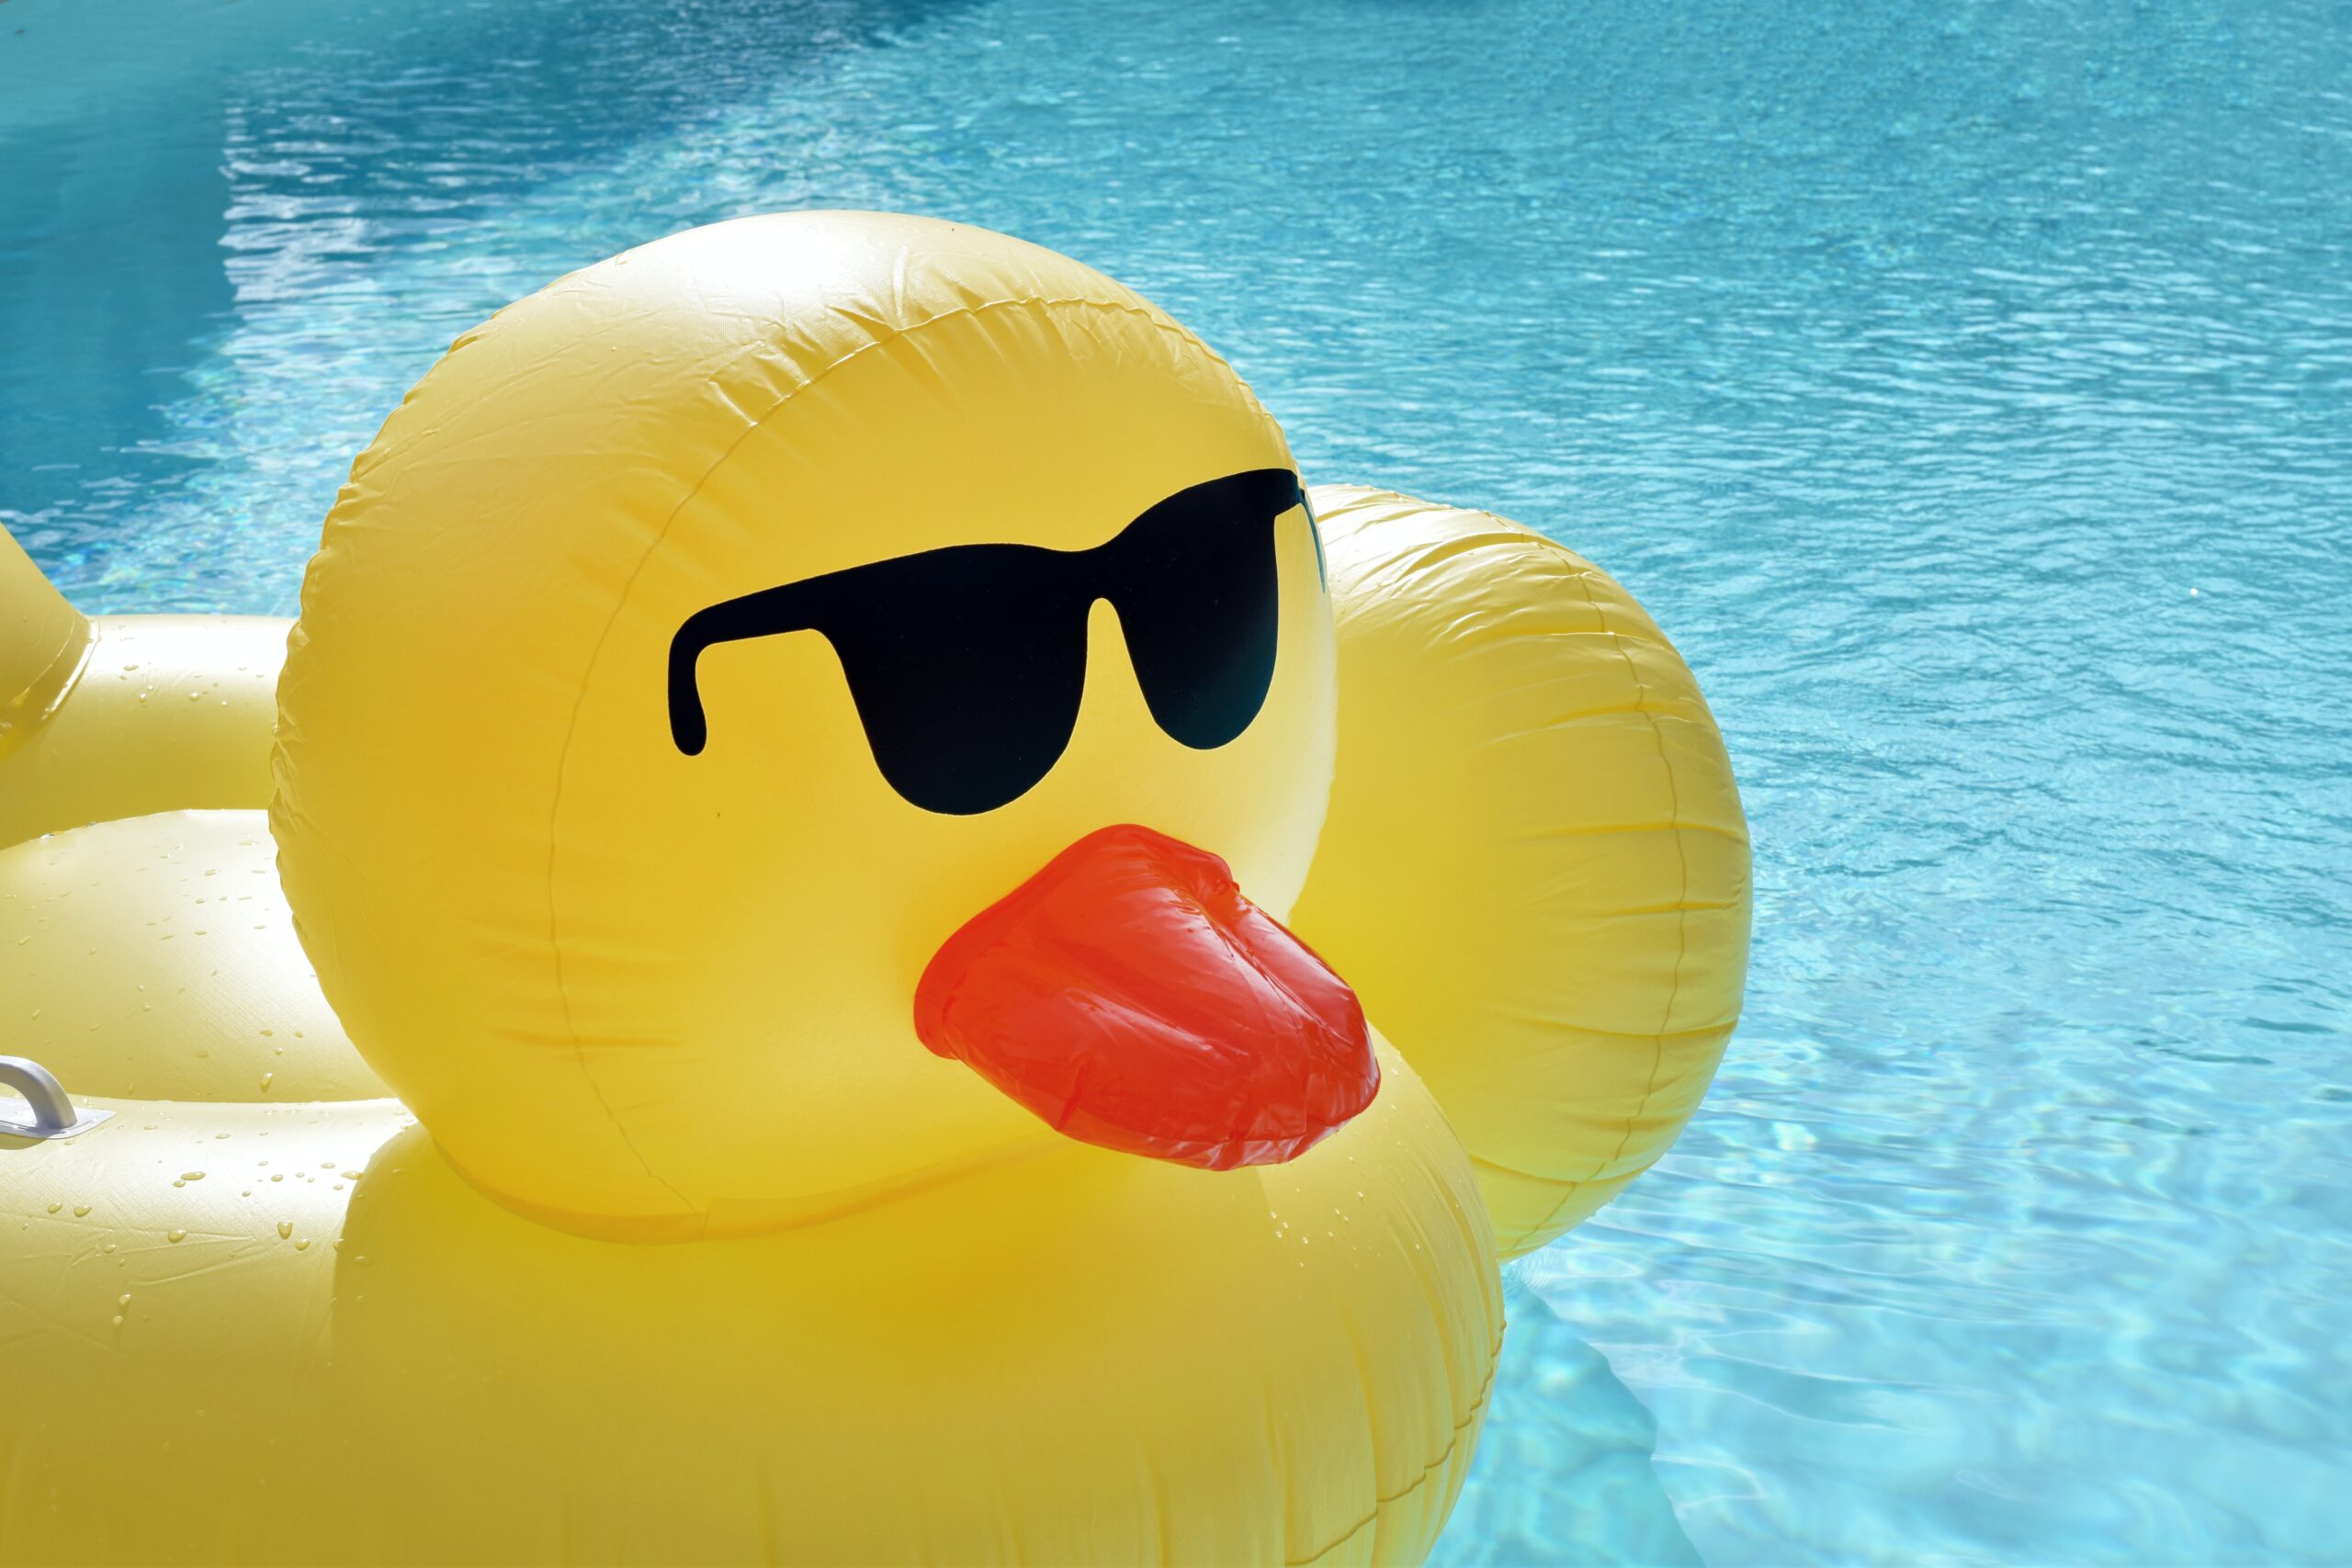 A yellow duck floaty - summer fundraising ideas to try